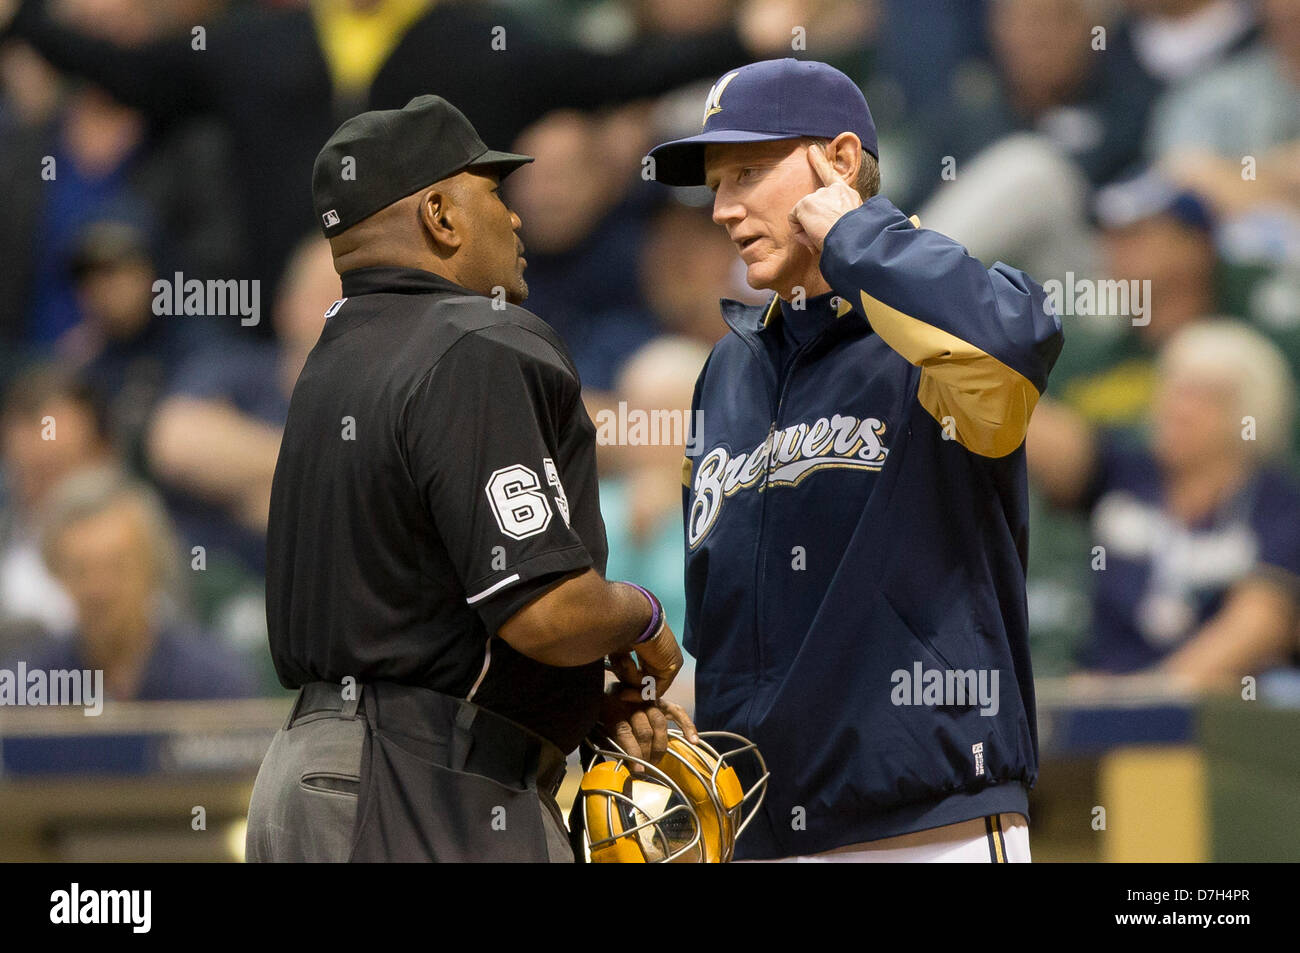 Milwaukee, Wisconsin, USA. 7th May 2013. Manager Ron Roenicke argues with the home plate umpire after a Gomez was hit by a pitch. Milwaukee leads Texas 6-3 in the 8th inning at Miller Park in Milwaukee, WI. John Fisher/CSM/Alamy Live News Stock Photo